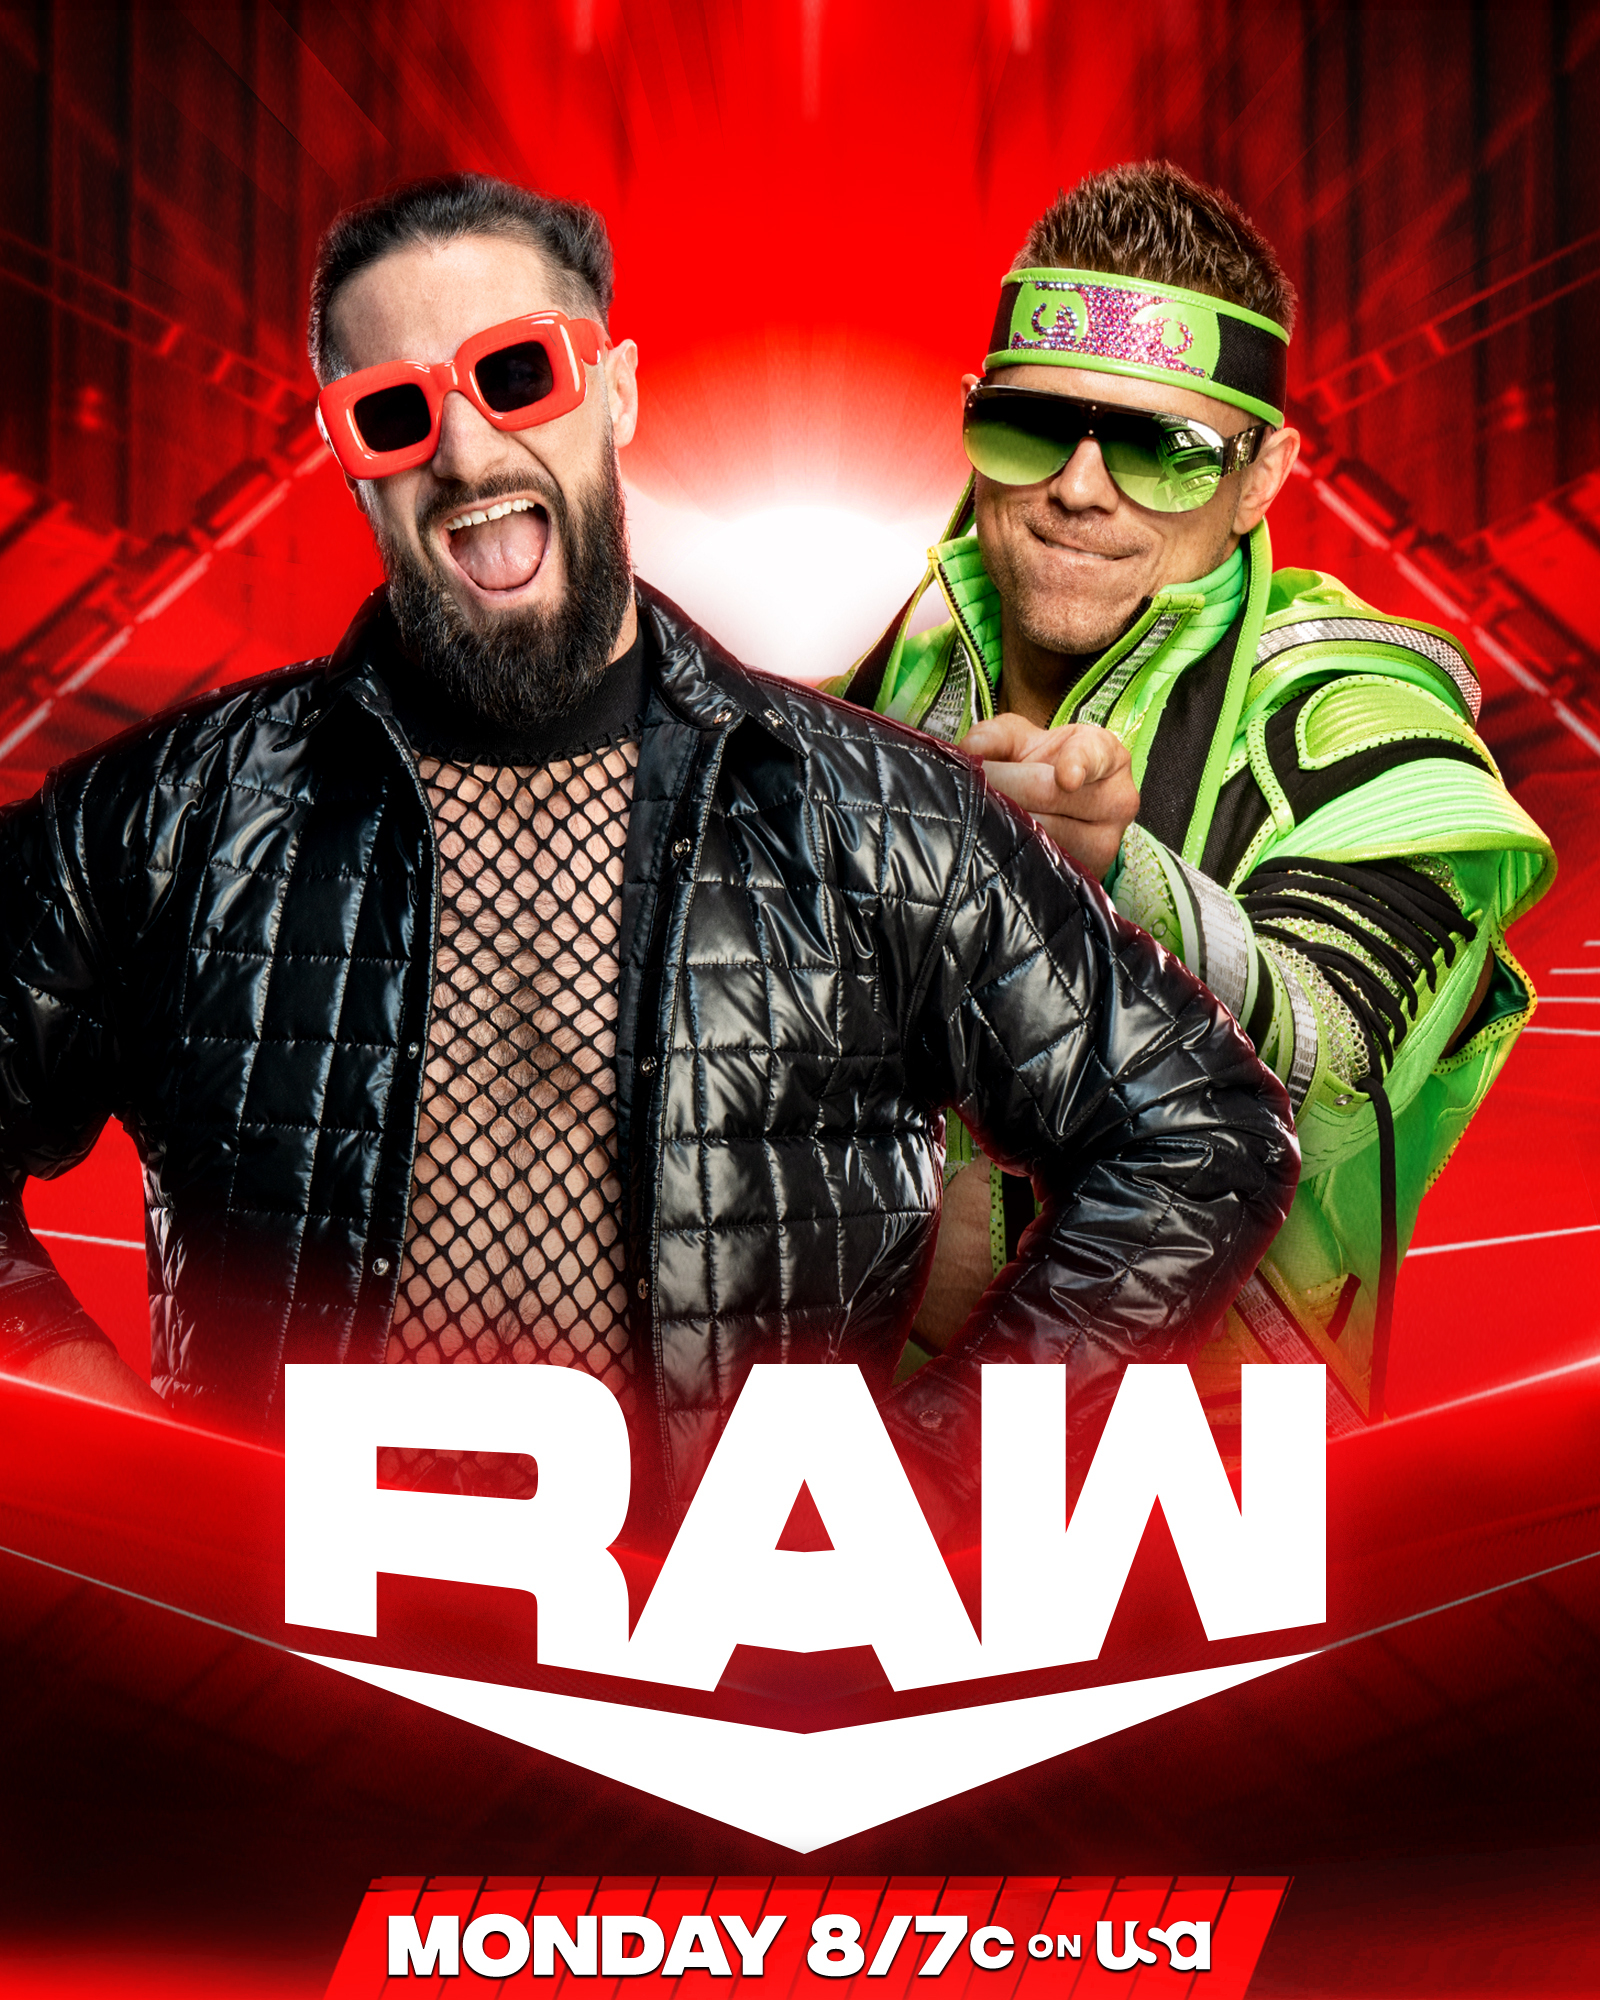 WWE Announces Huge Match For Tonight's Episode Of WWE RAW